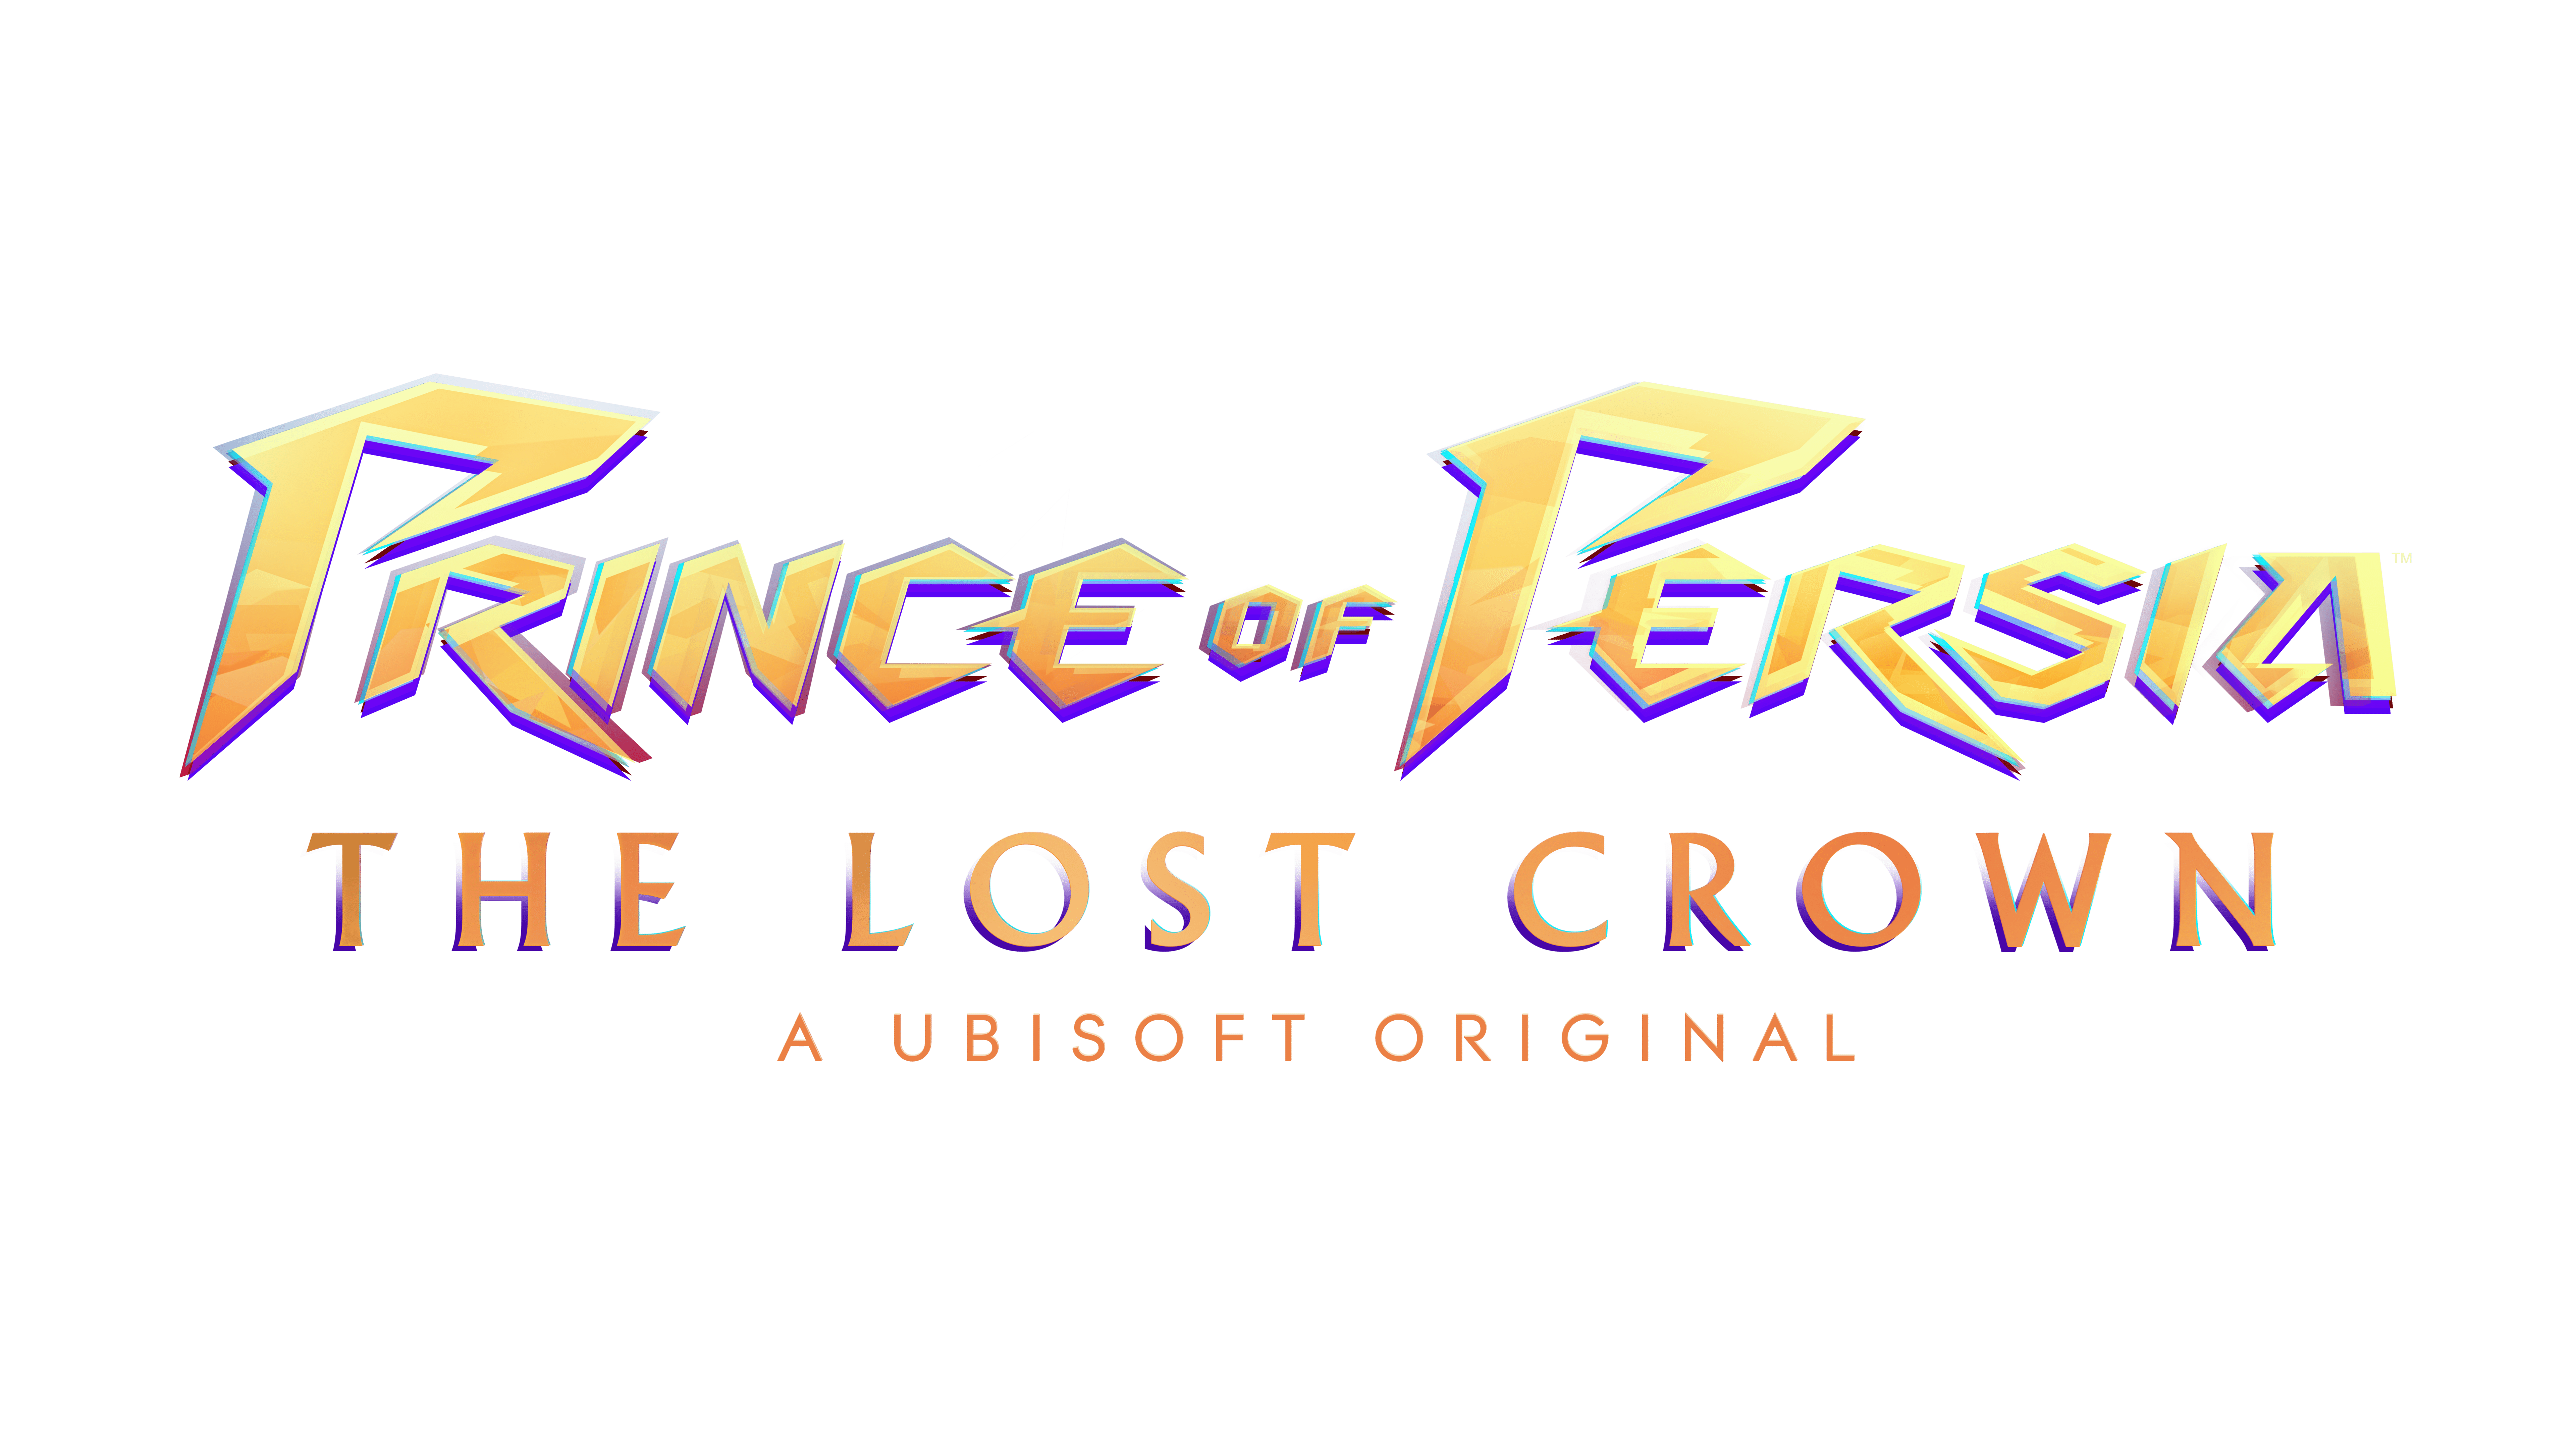 Prince of Persia: The Lost Crown [PlayStation 4] — MyShopville